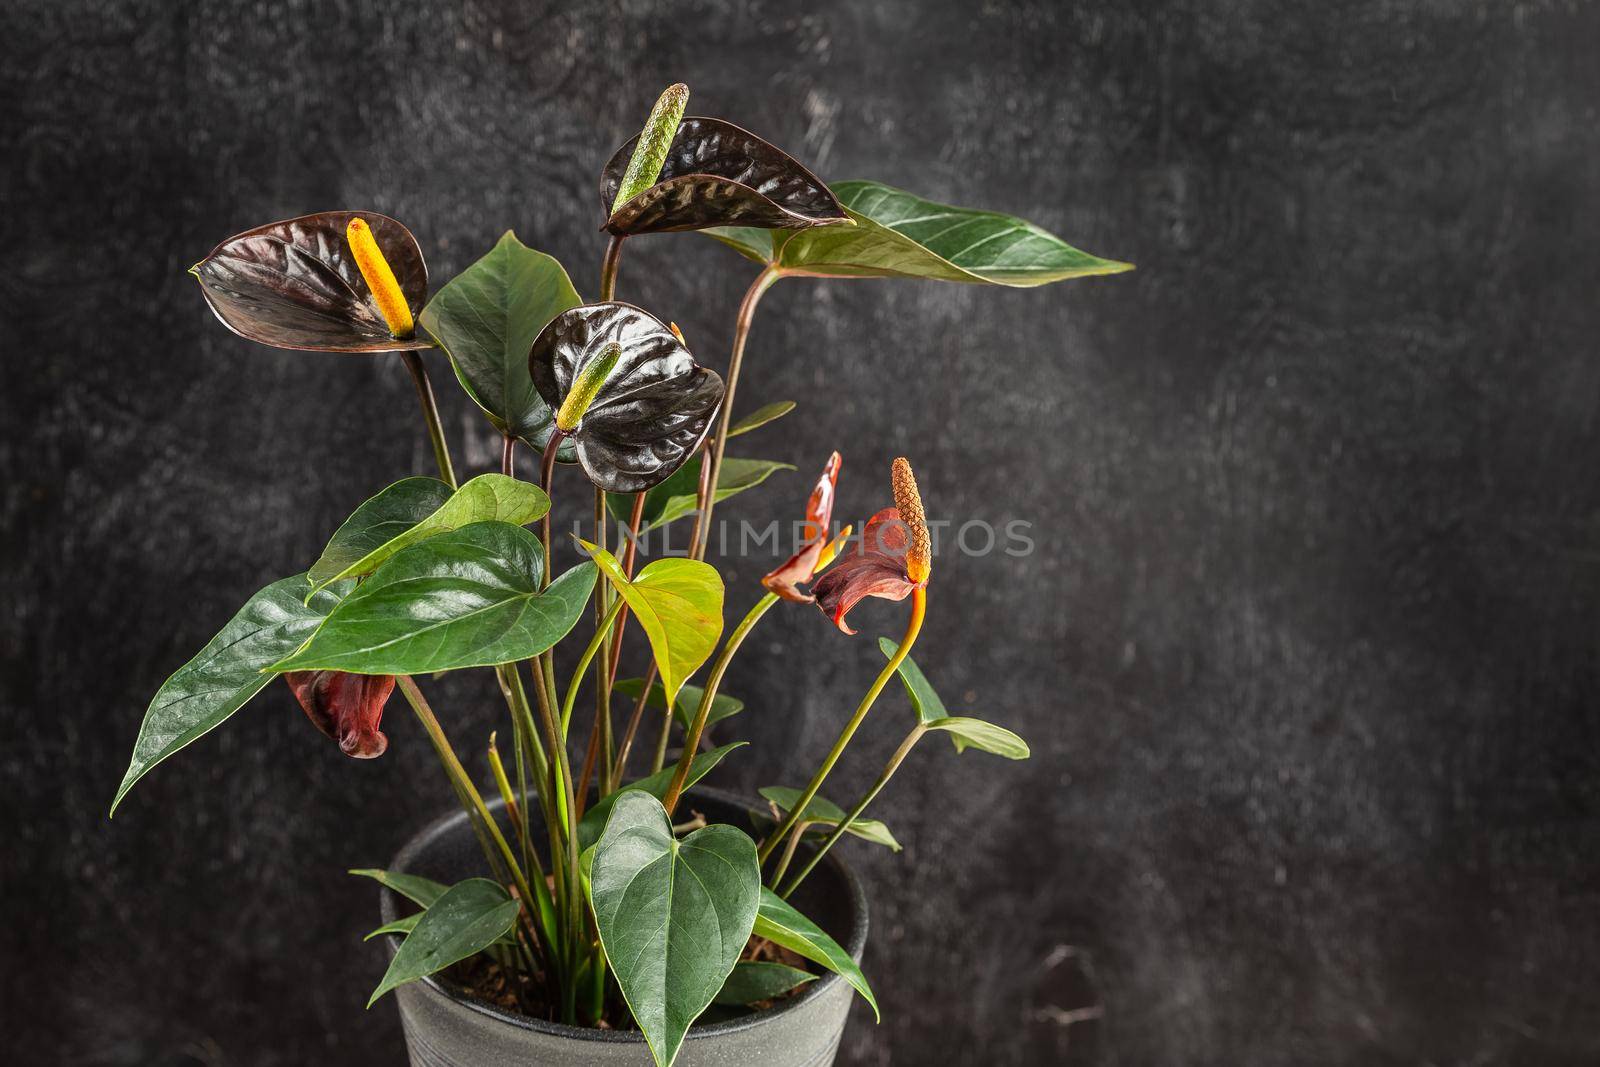 Black Anthurium Andreanum or Flamingo Flower plant by Syvanych